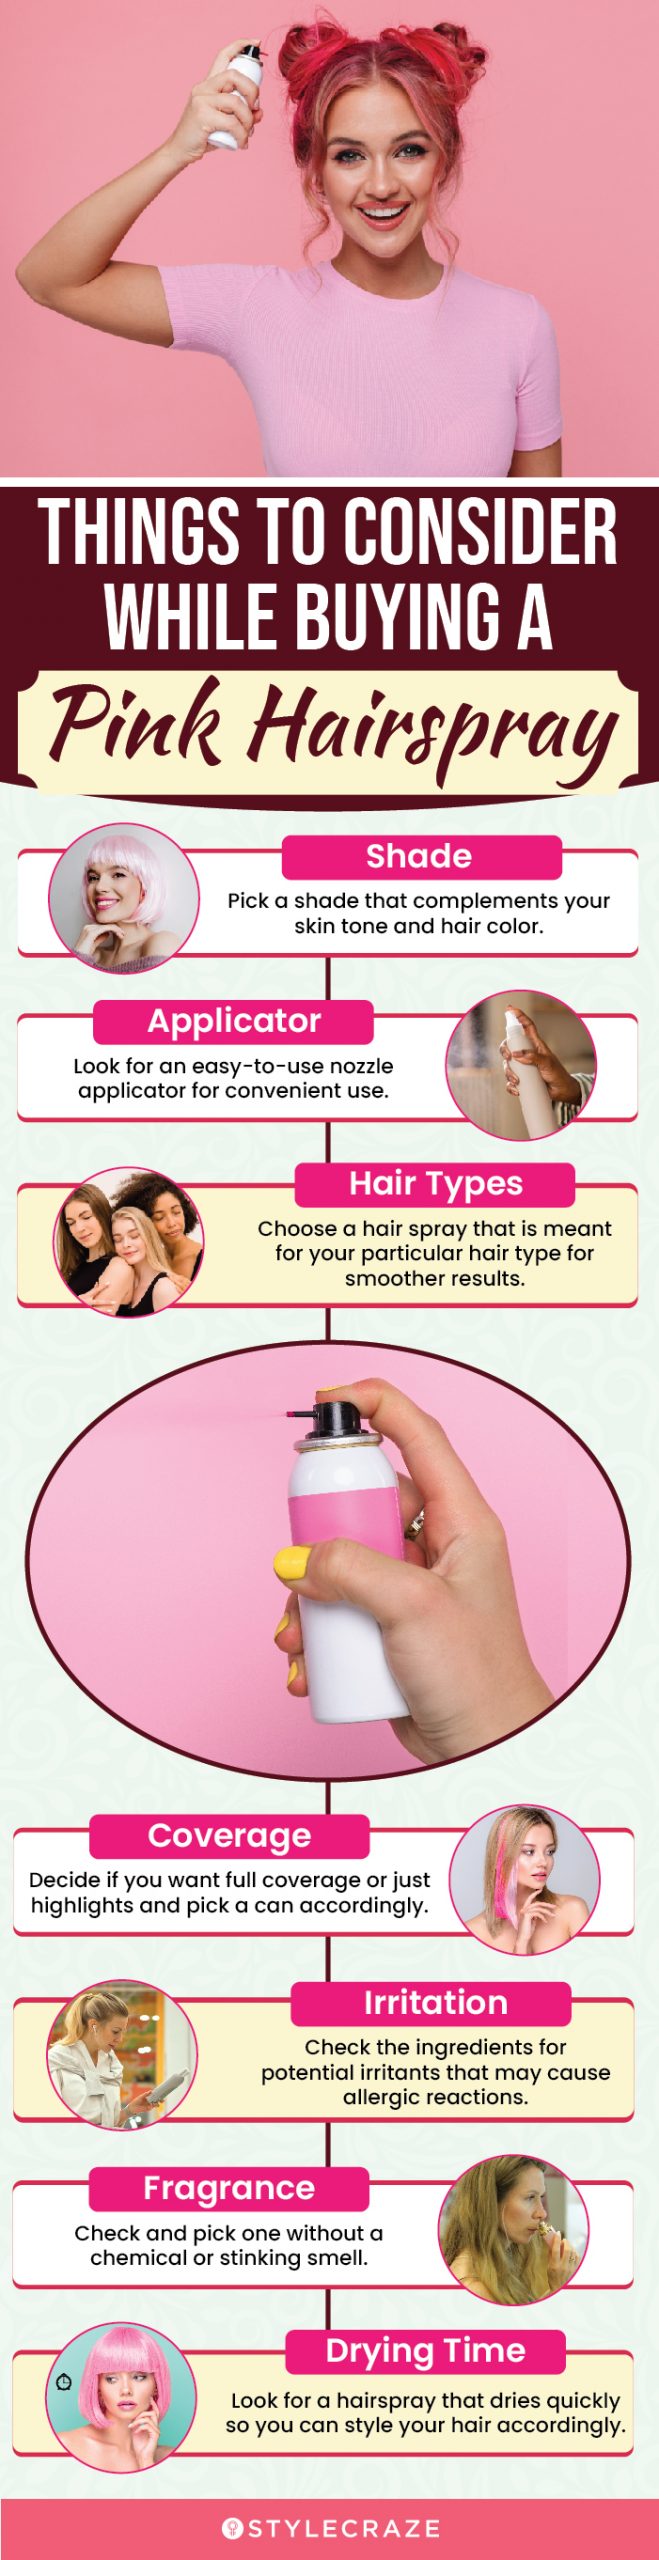 Things To Consider While Buying A Pink Hairspray (infographic)